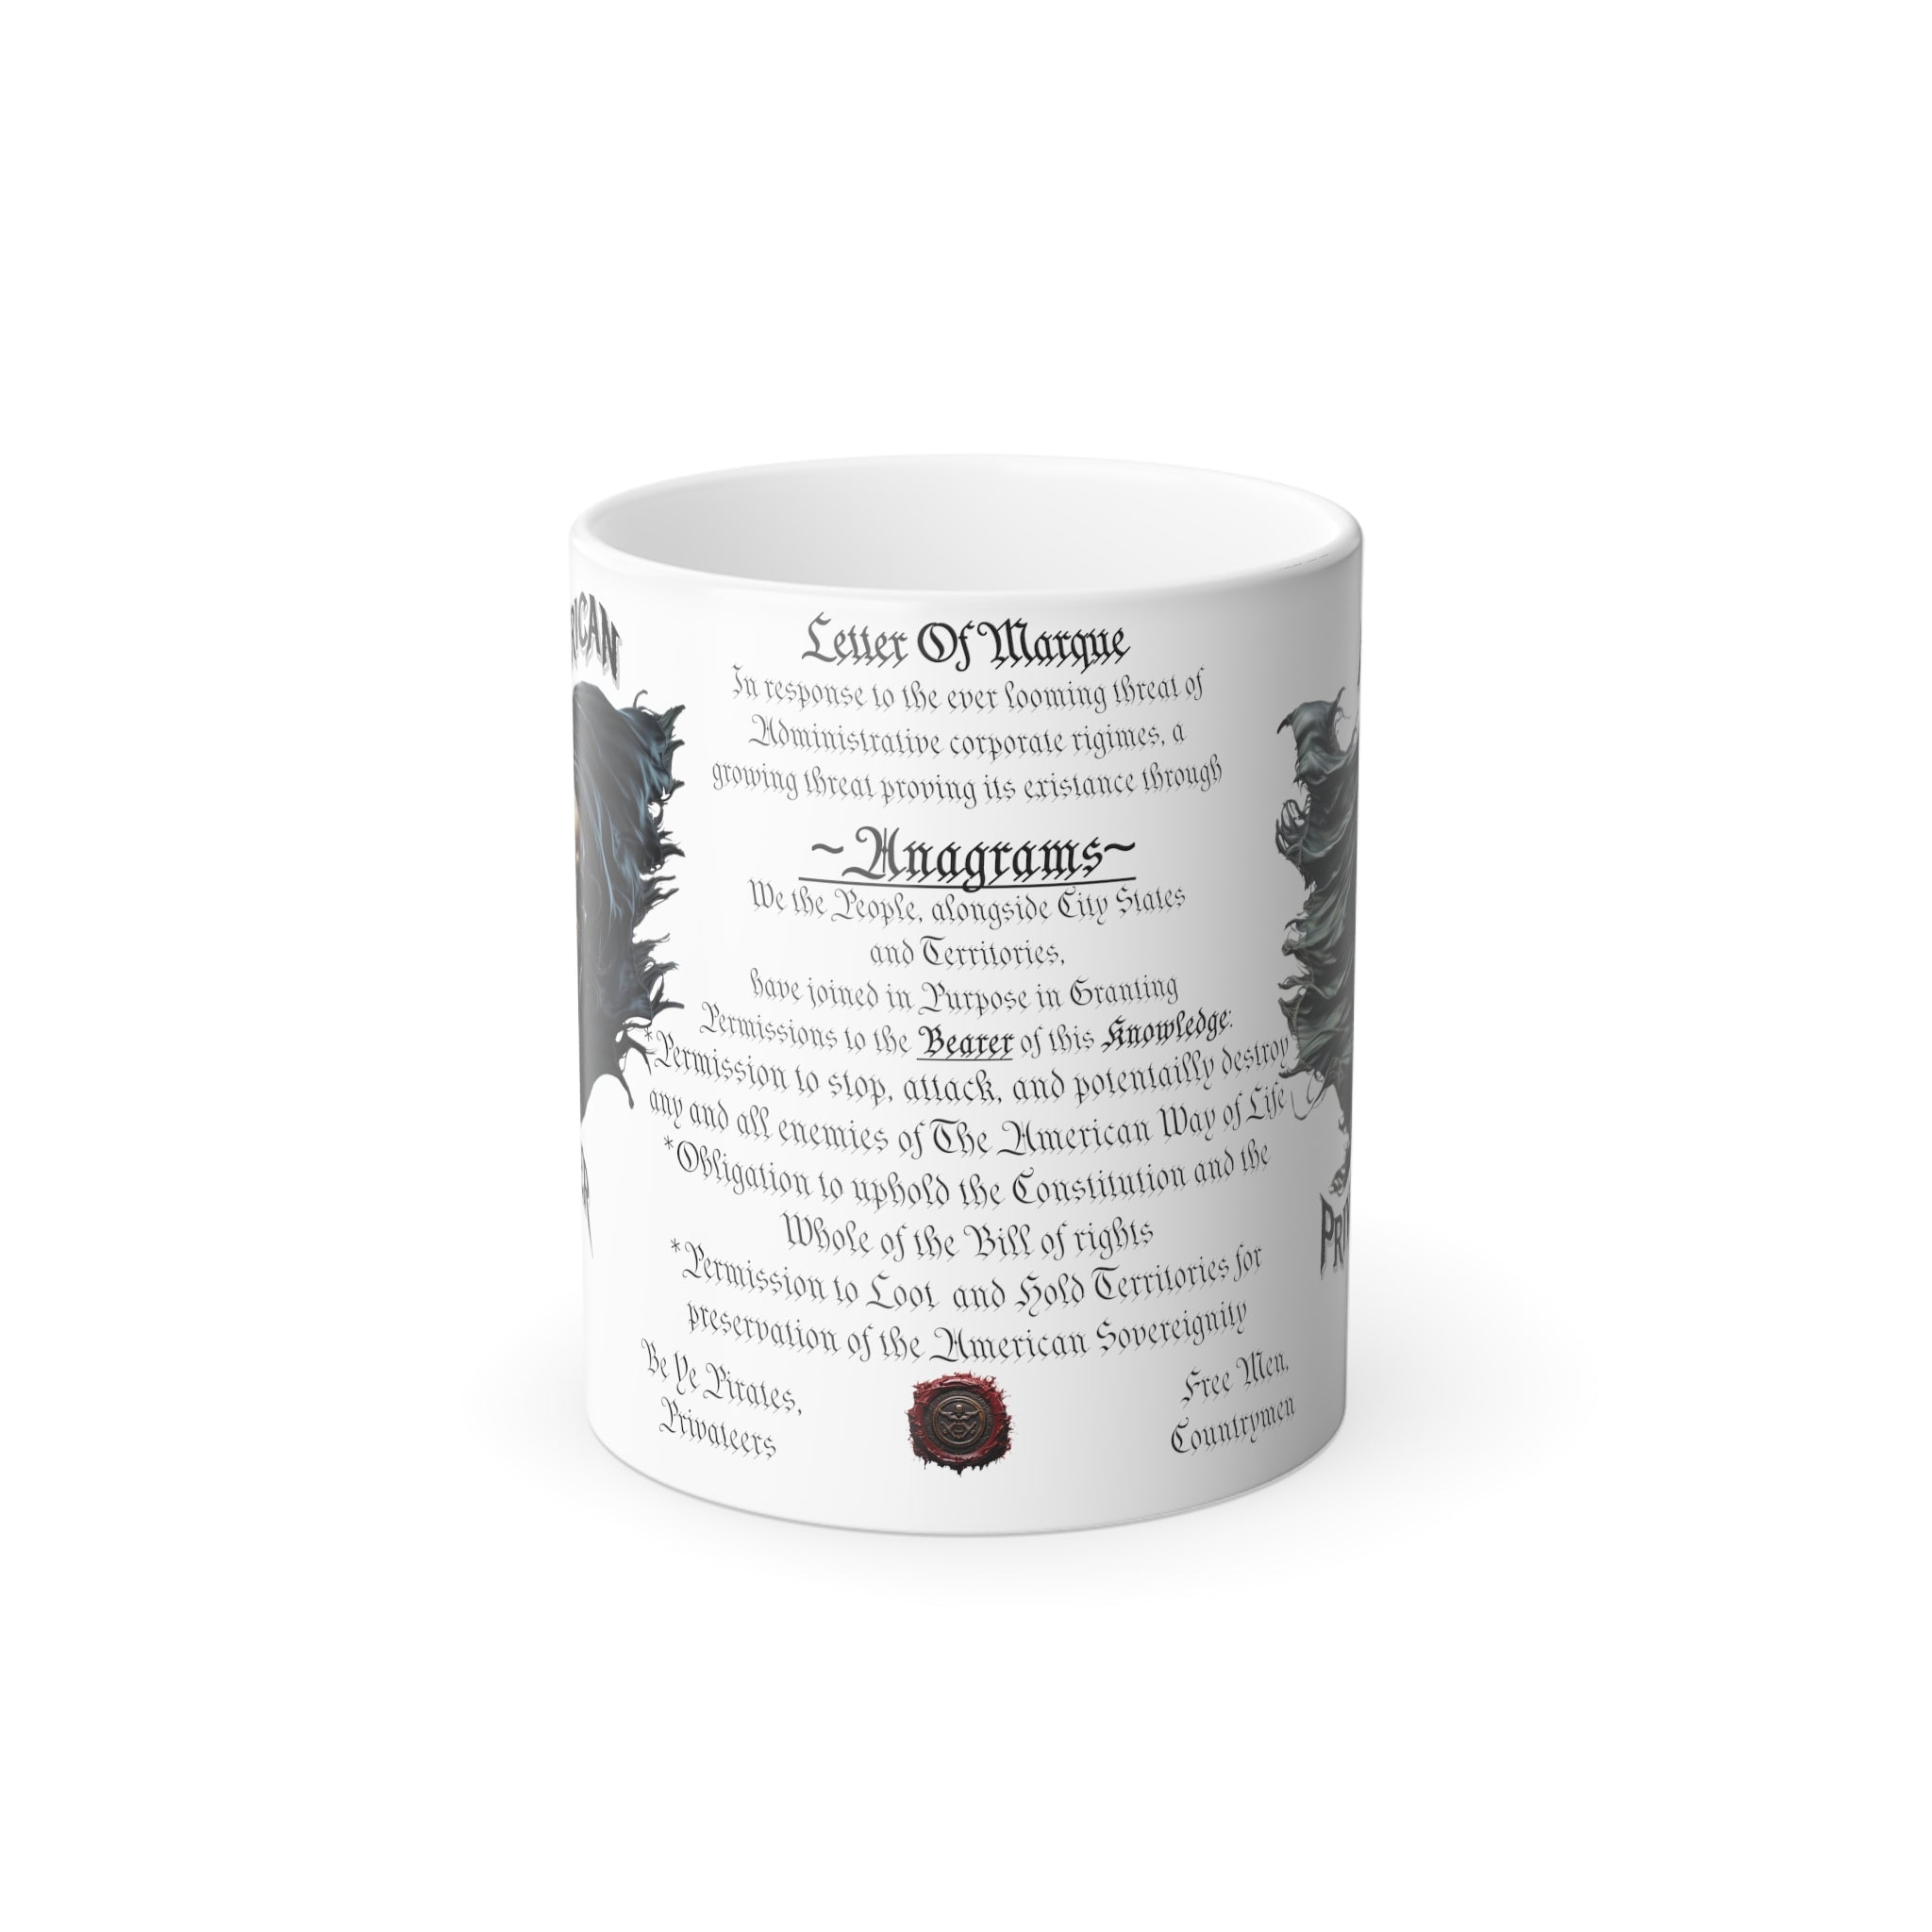 American Privateer / Letter of Marque Color Morphing Mug, 11oz